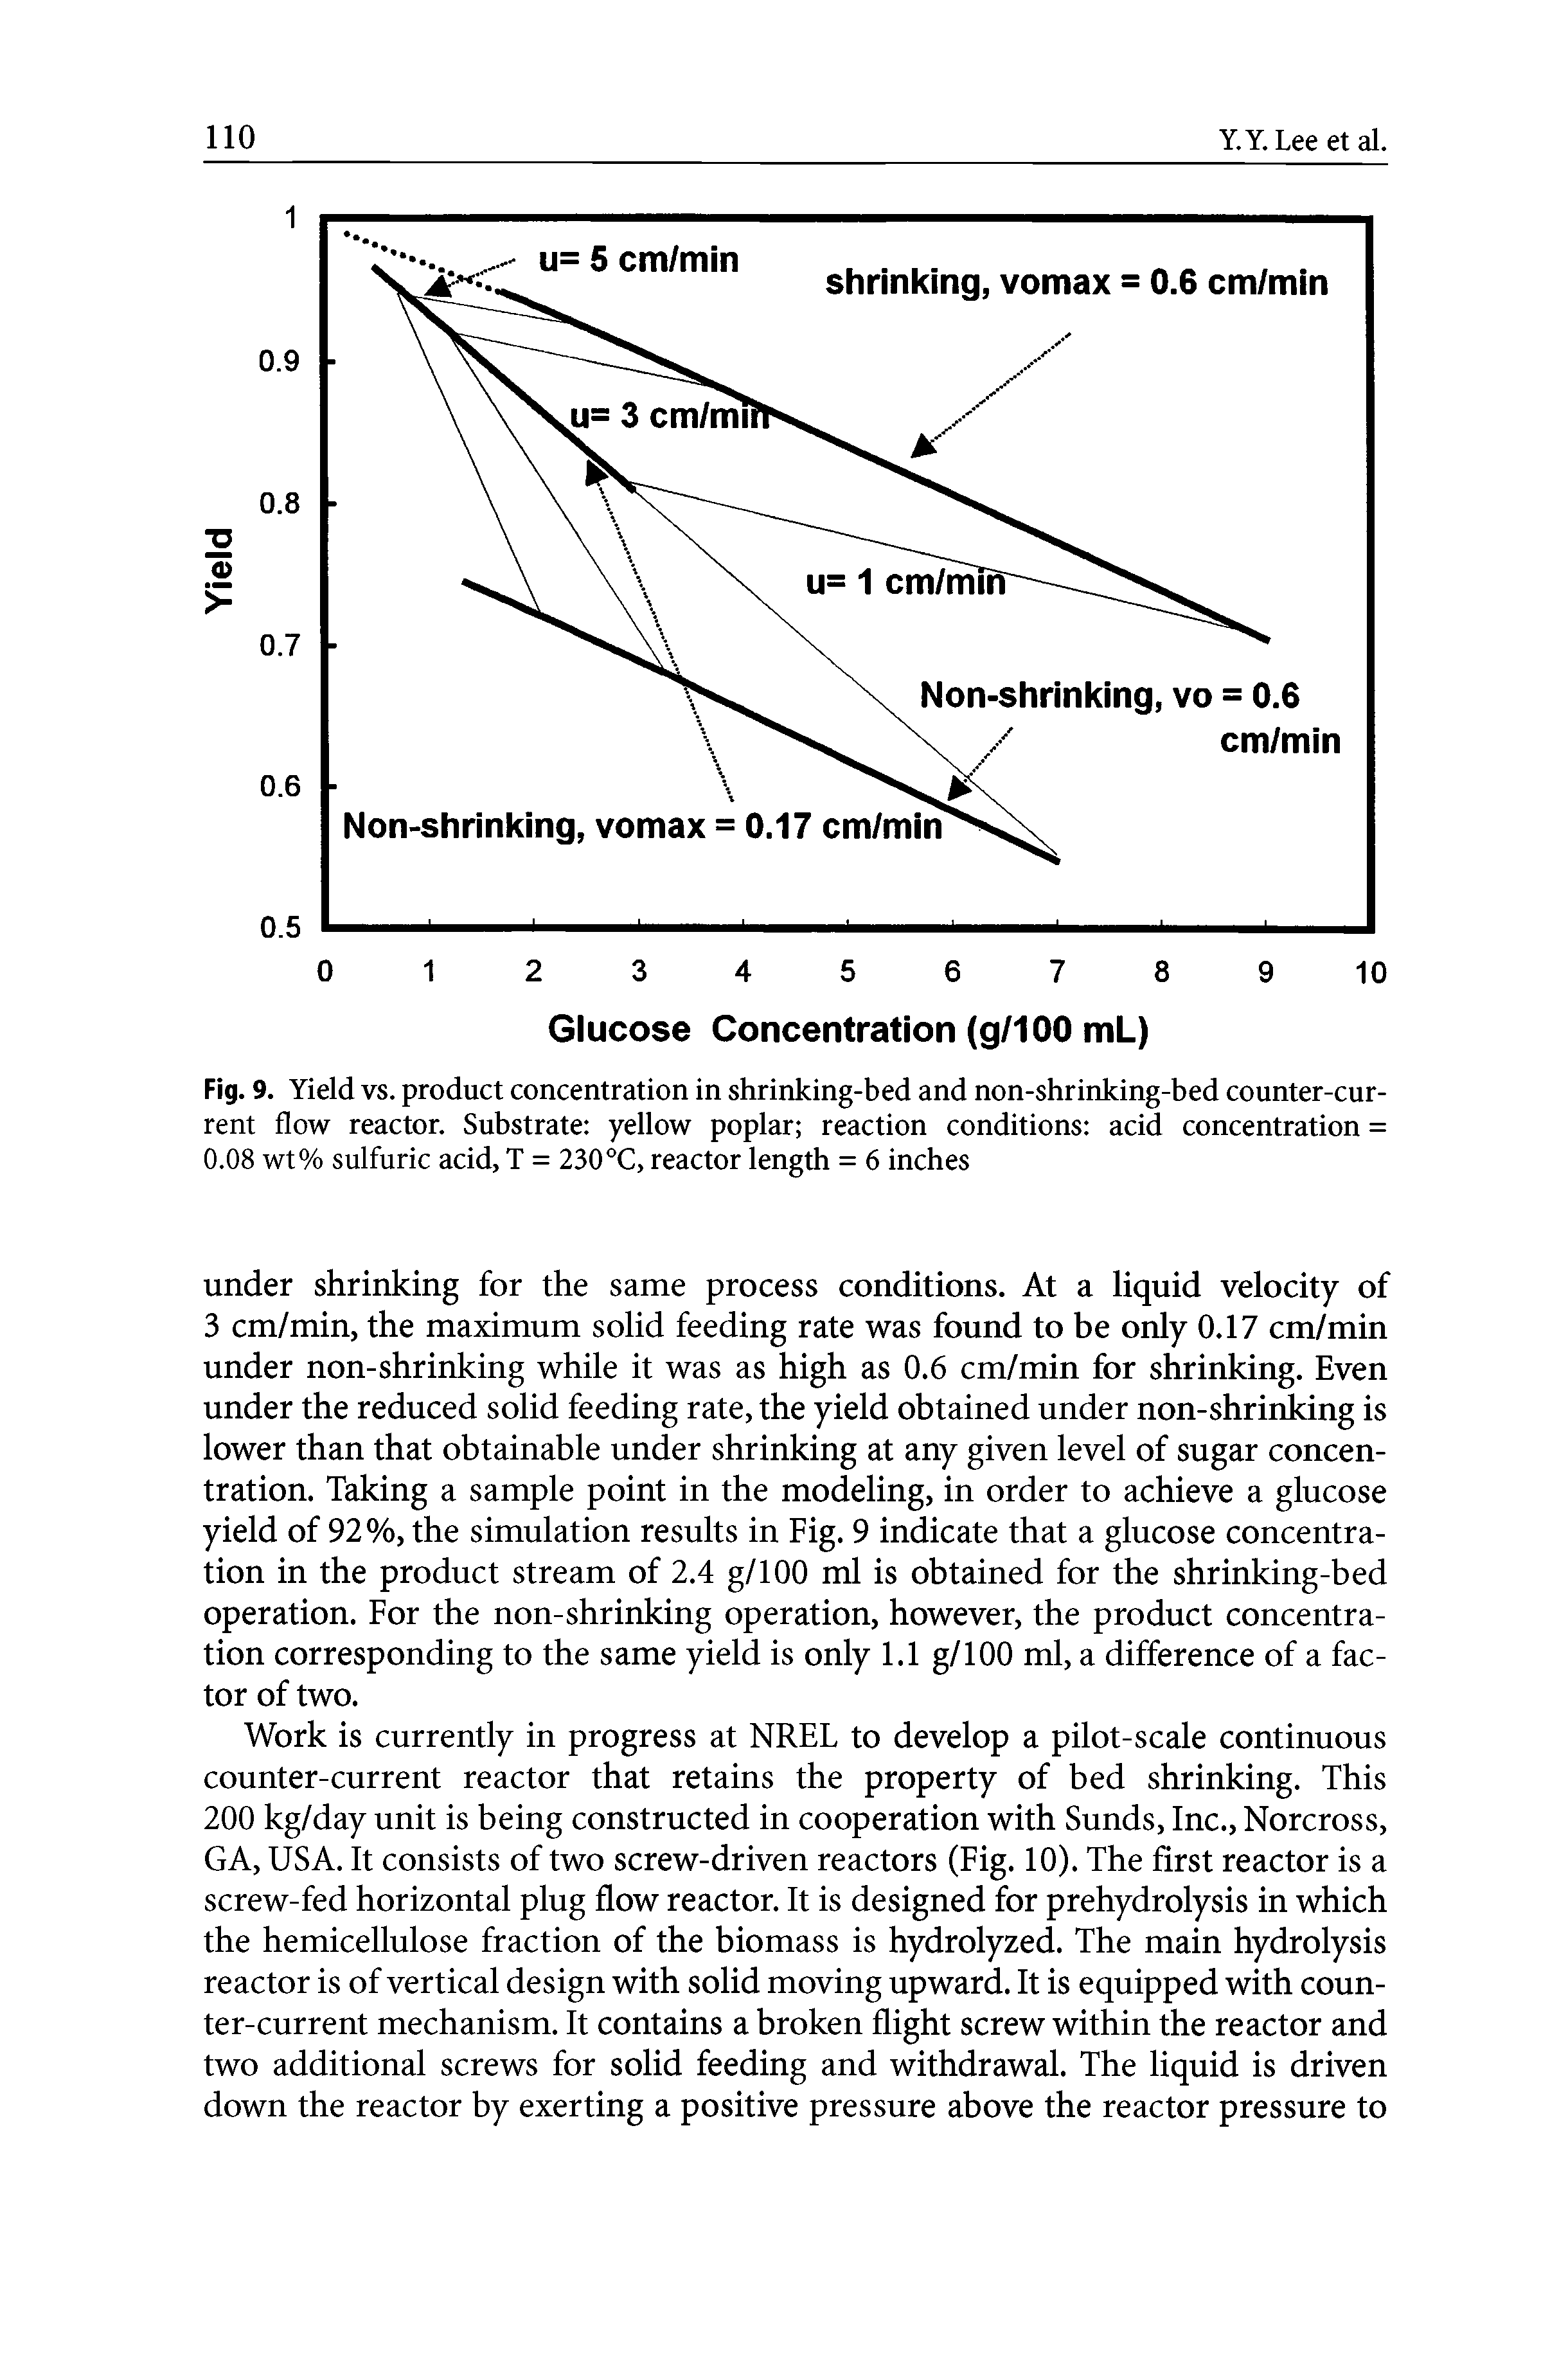 Fig. 9. Yield vs. product concentration in shrinking-bed and non-shrinking-bed counter-current flow reactor. Substrate yellow poplar reaction conditions acid concentration = 0.08 wt% sulfuric acid, T = 230°C, reactor length = 6 inches...